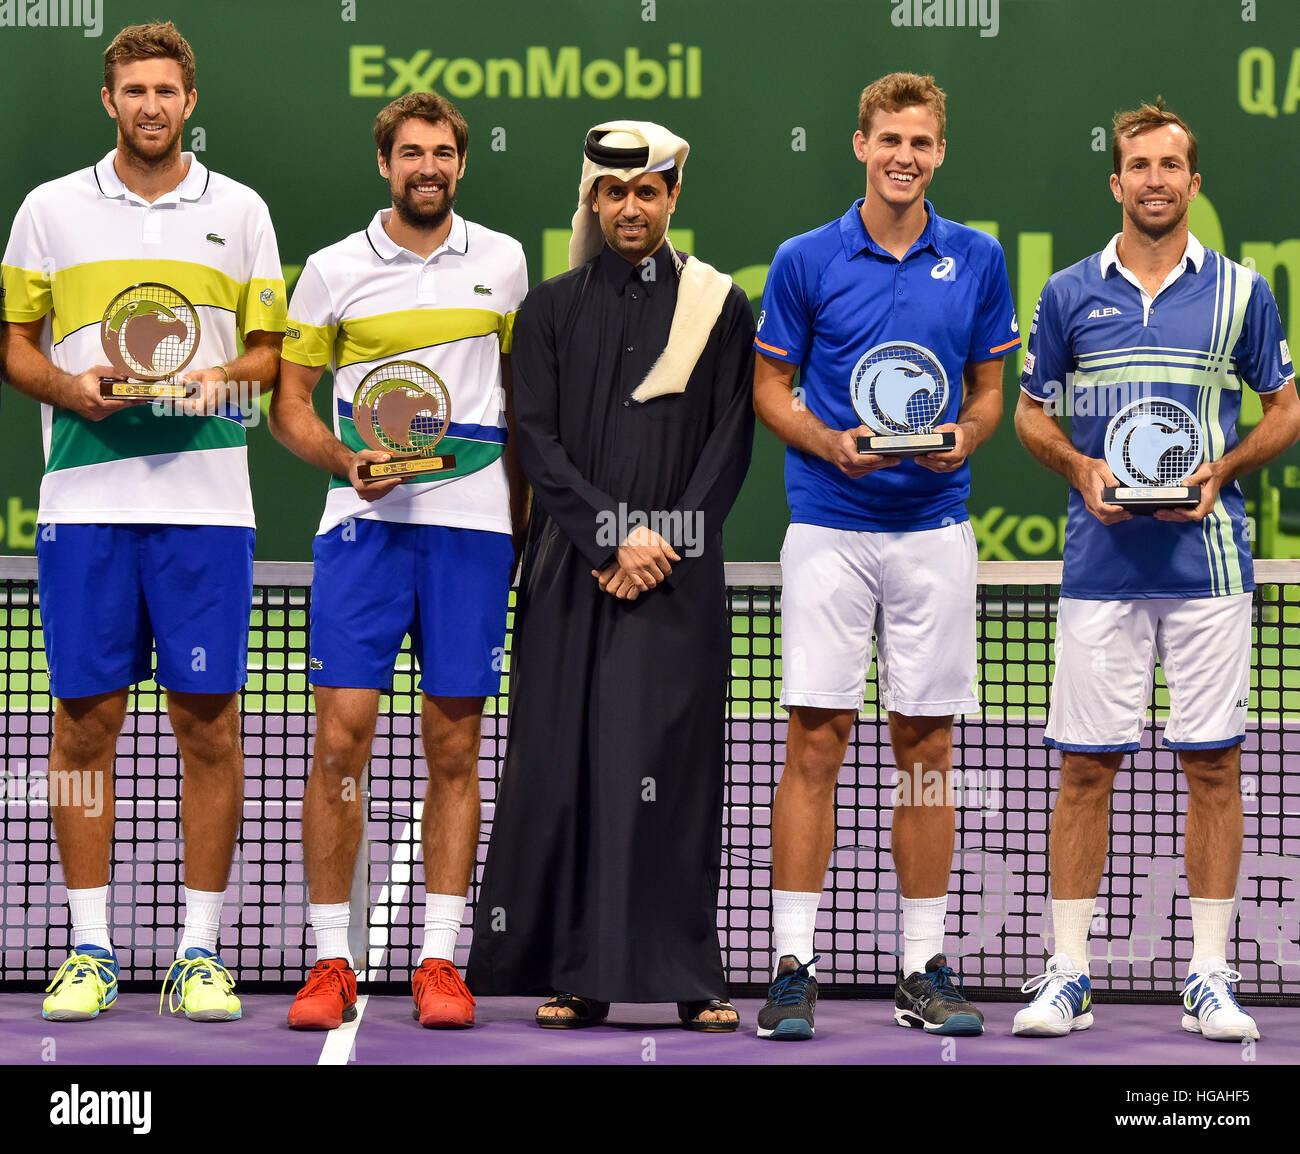 President Qatar Tennis Federation Al Khelaifi High Resolution Stock  Photography and Images - Alamy